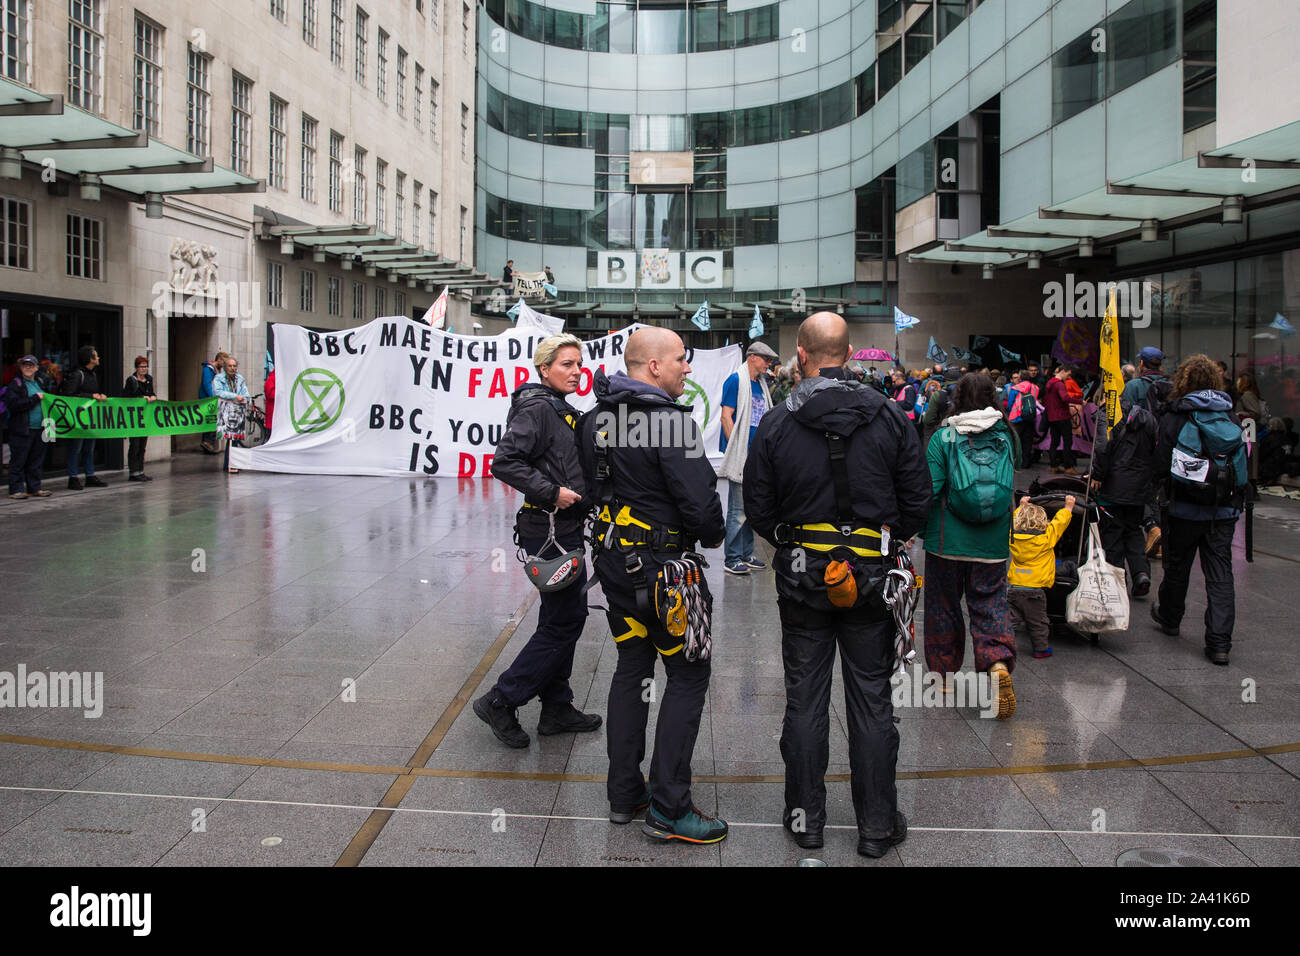 London, UK. 11 October, 2019. Specialist police officers prepare to remove climate activists from Extinction Rebellion standing on the glass parapet above the main entrance to the BBC’s New Broadcasting House on the fifth day of International Rebellion protests. The activists were demanding that the broadcaster ‘tell the truth’ regarding the climate emergency. Credit: Mark Kerrison/Alamy Live News Stock Photo